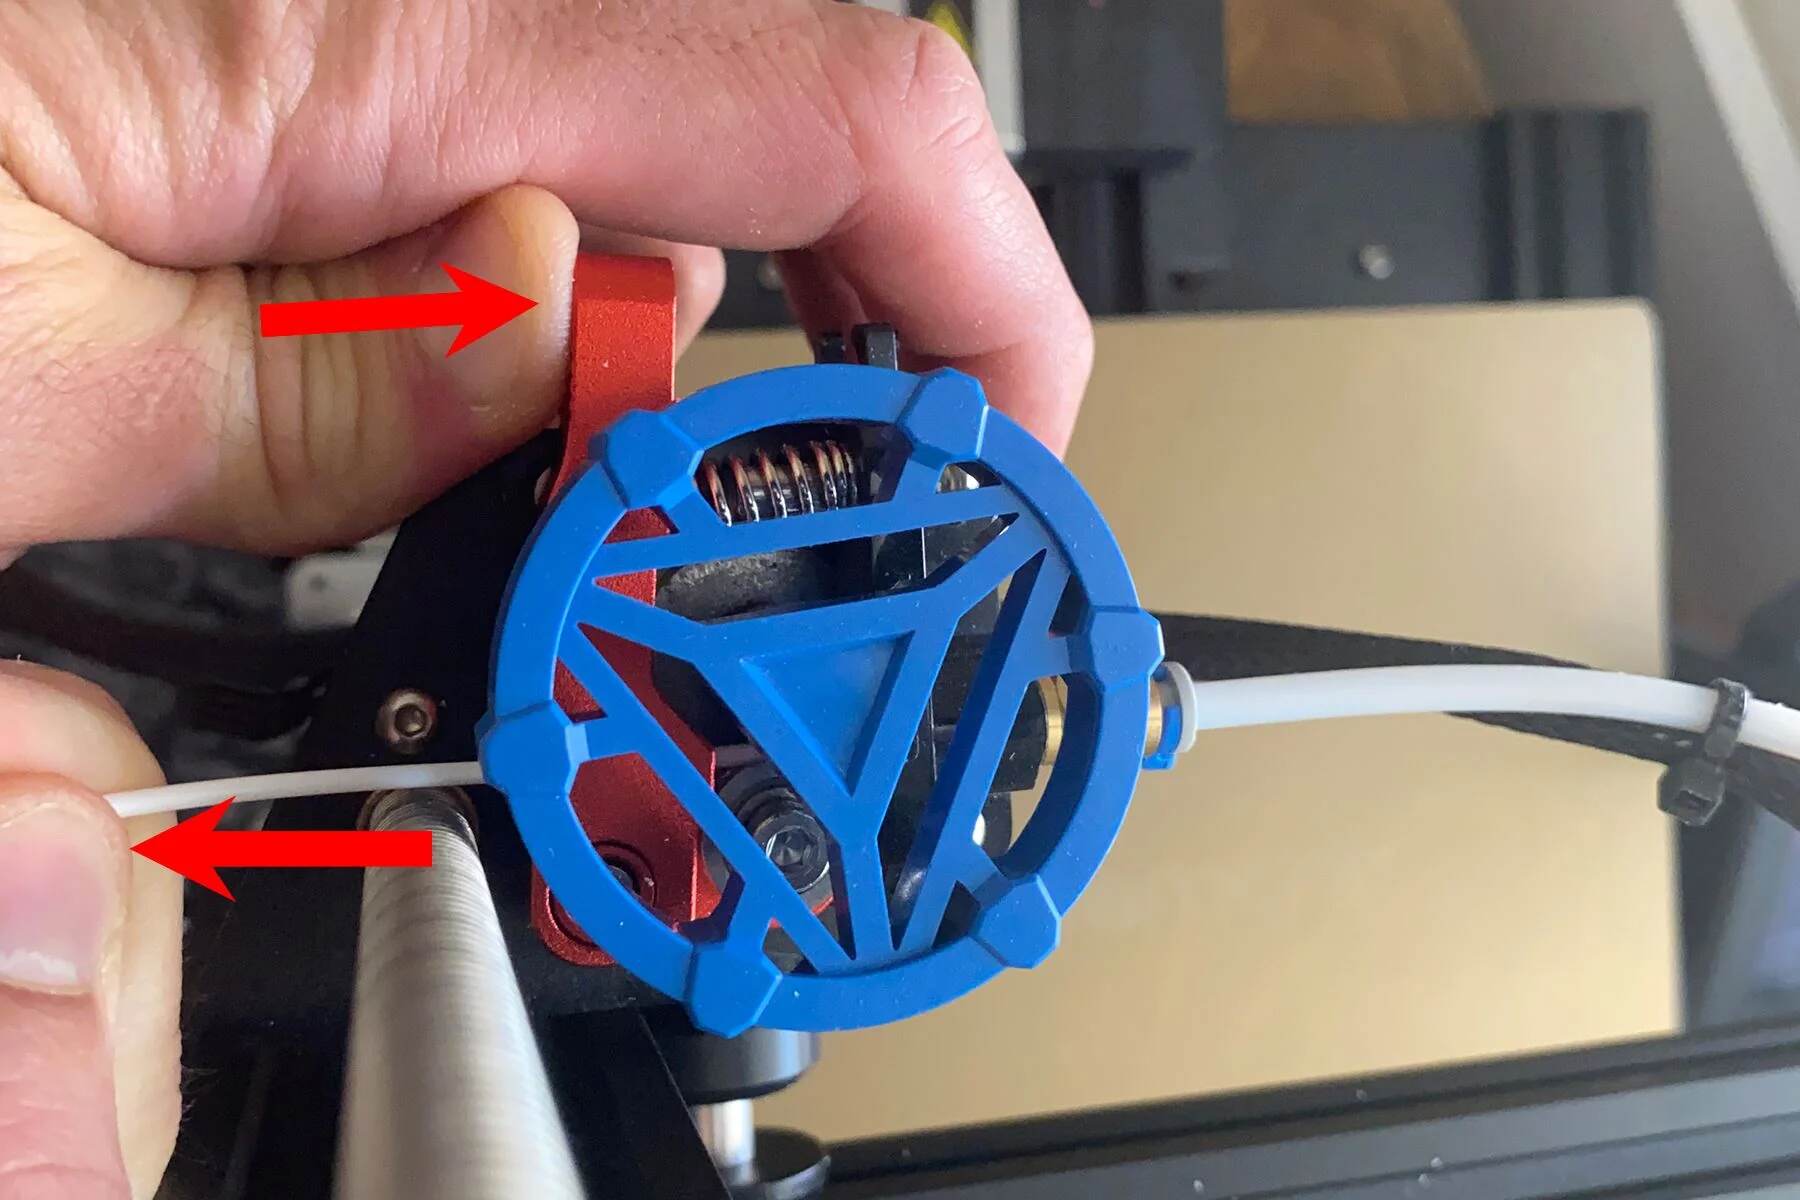 How To Change Filament On A 3D Printer